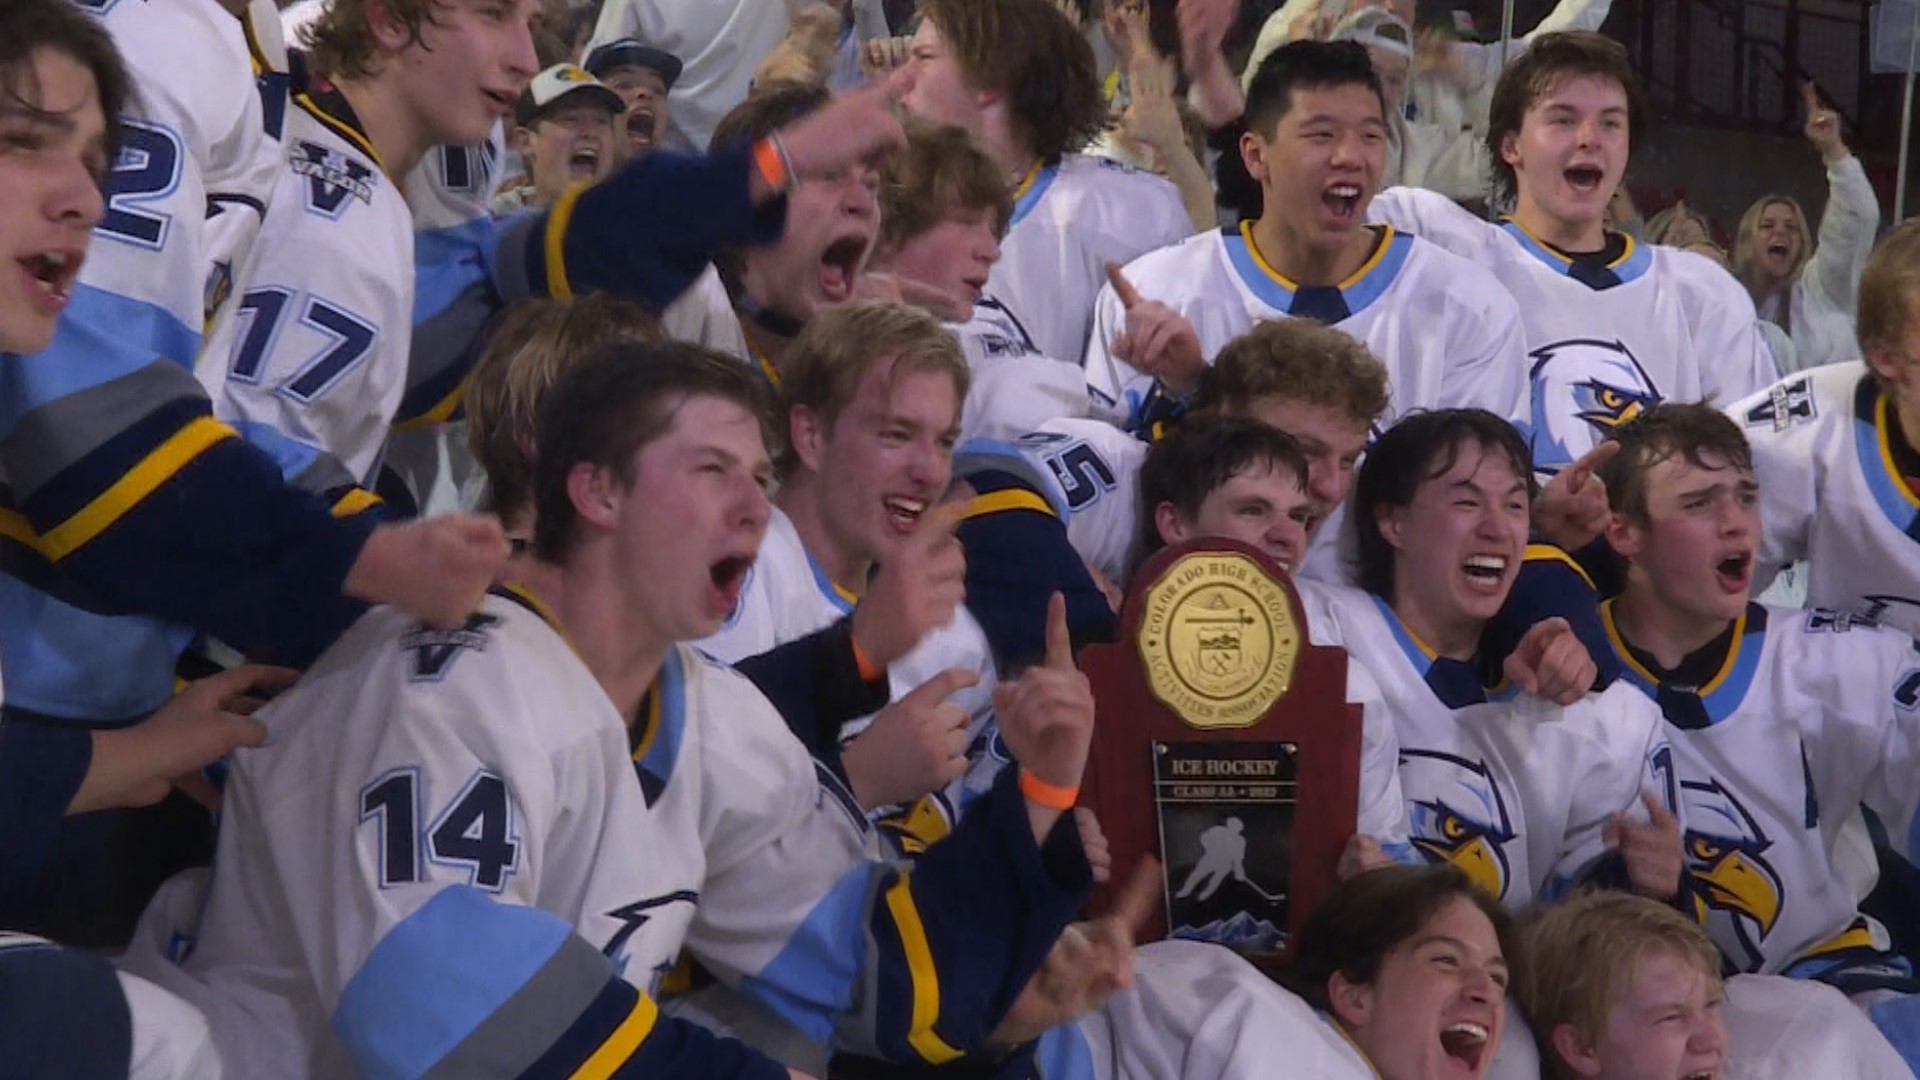 The Eagles won 7-3 over the Mustangs in the Class 5A hockey state title game on Tuesday night.